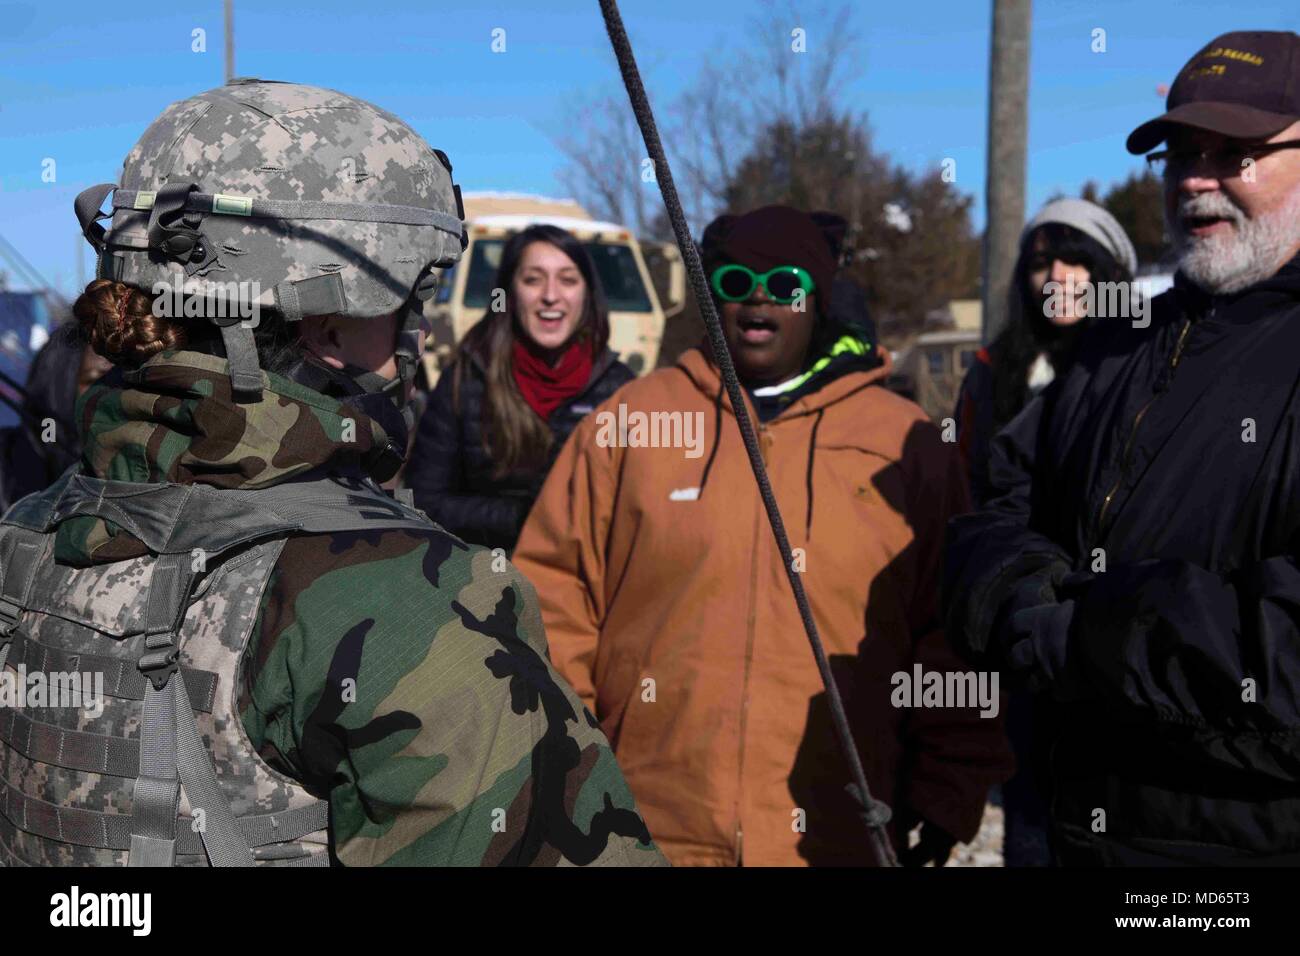 U.S. Army Reserve 1st Sgt. Lauren Herrick, of the 364th Civil Affairs Brigade, speaks with civilians acting as local nationals as a part of a civil affairs training exercise during the Combat Support Training Exercise (CSTX) at Fort Knox, Kentucky, March 22, 2018. CSTX 2018 ensures Army reserve units are trained and ready to deploy on short notice and bring capable, combat ready, and lethal firepower in support of the Army and our joint partners anywhere in the world. (U.S. Army photo by Spc. Durrell Jones) Stock Photo